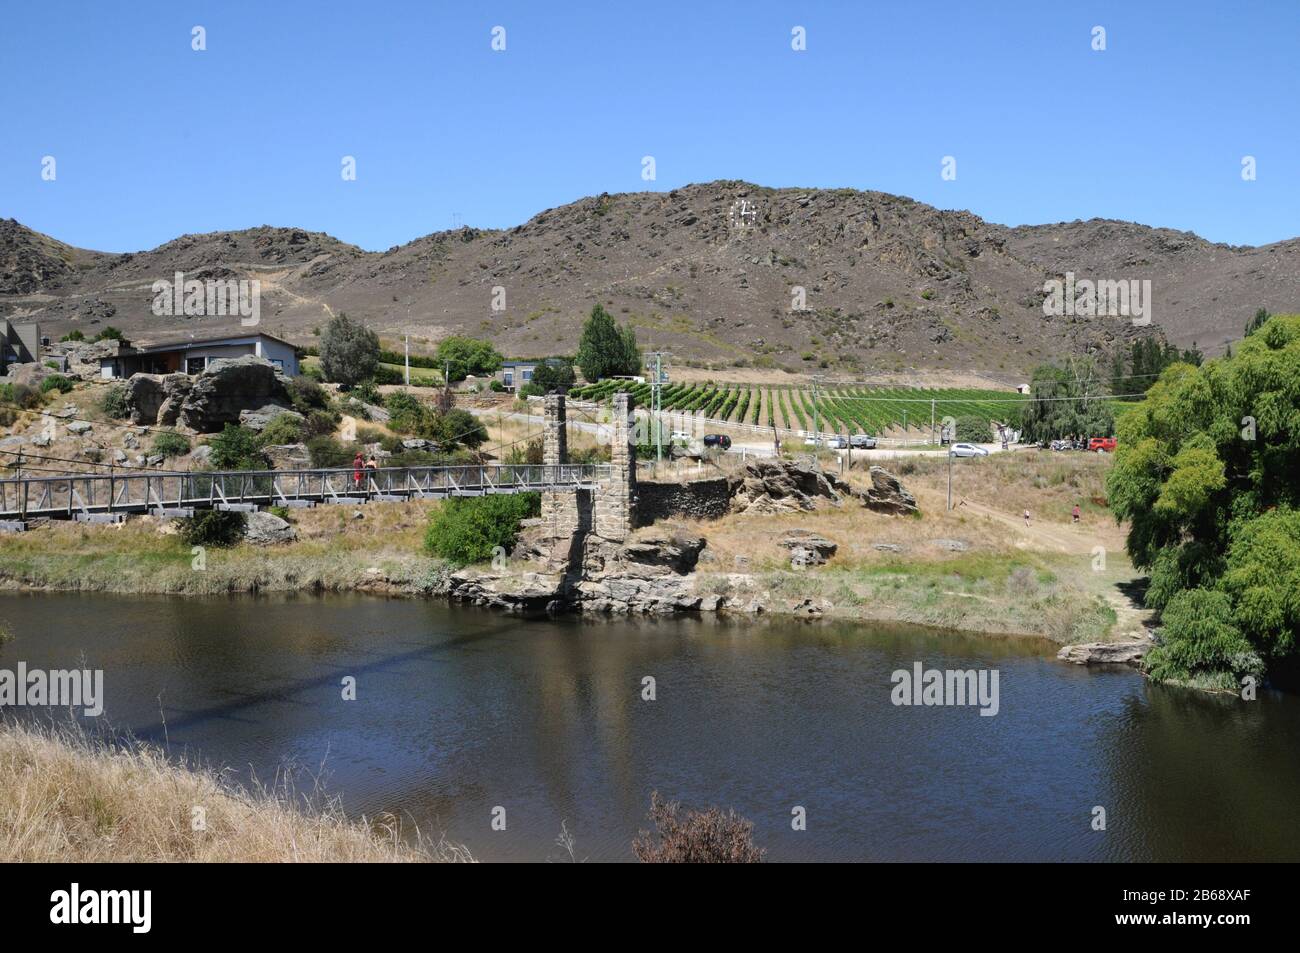 The bridge over the Manuherikia River in the town of Alexandra in Central Otago New Zealand. The restored bridge is known locally as Shaky Bridge! Stock Photo